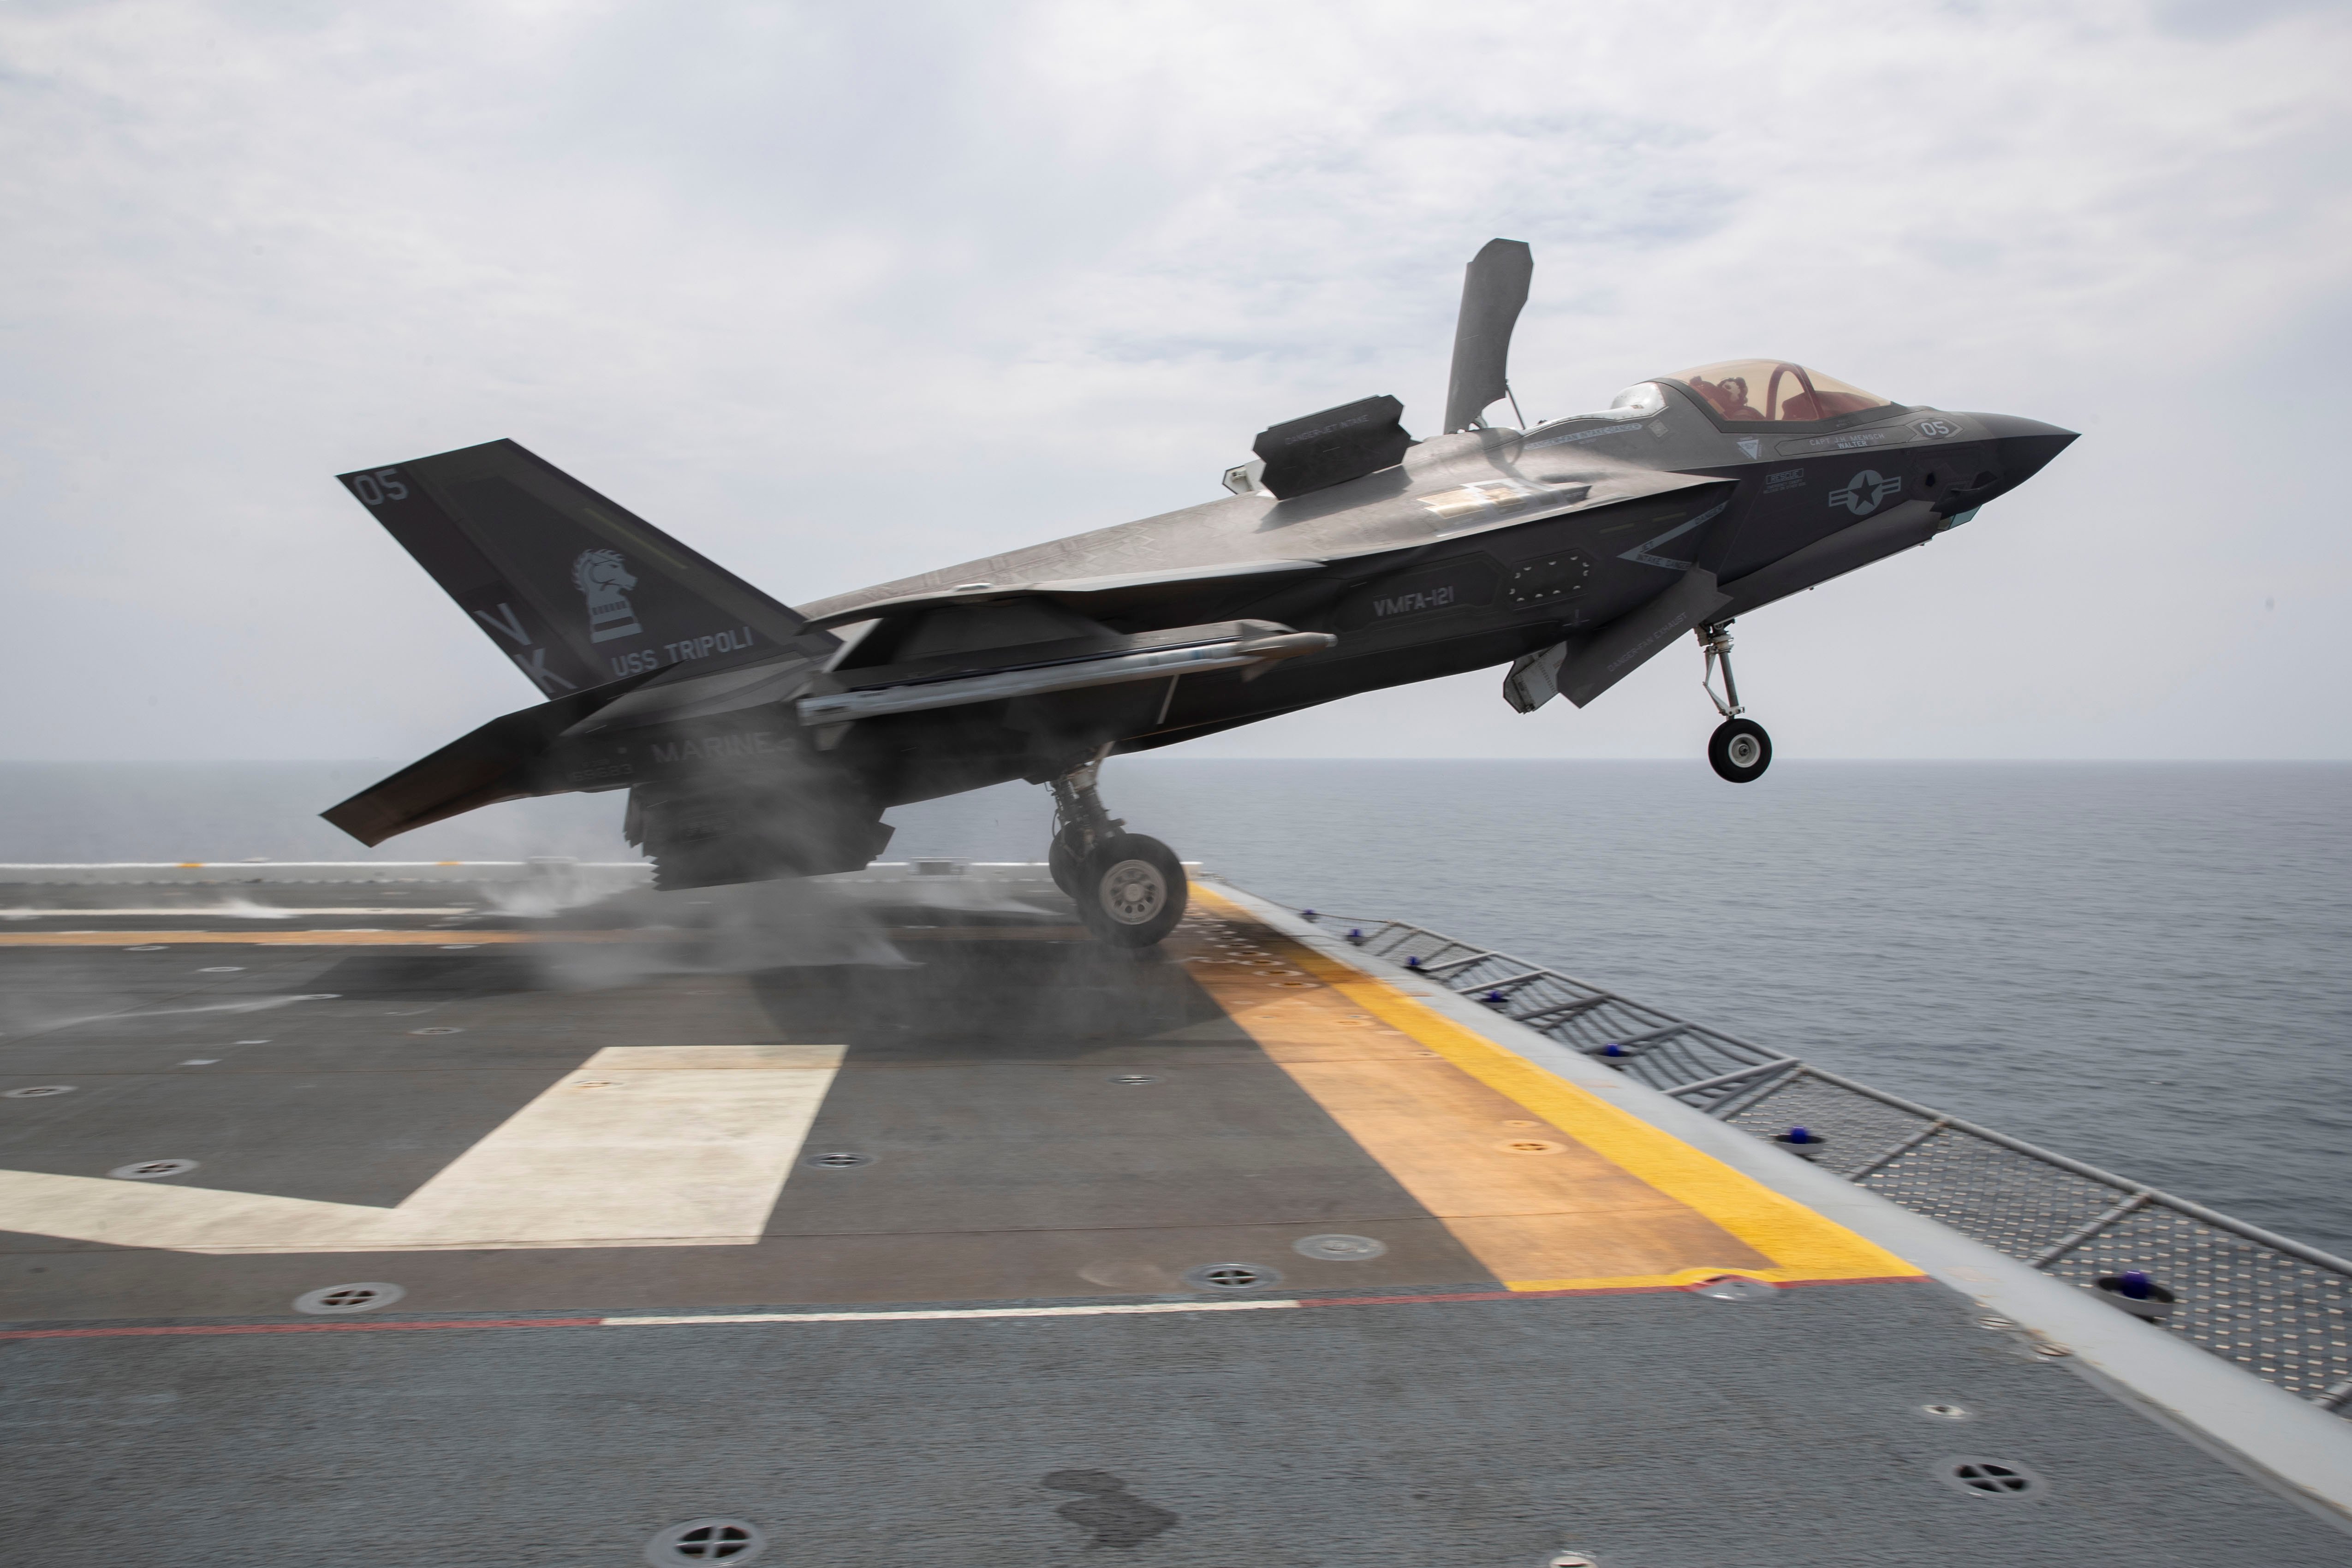 F-35B Lightning II aircraft assigned to Marine Medium Tiltrotor Squadron (VMM) 262 (Reinforced) launches from amphibious assault carrier USS Tripoli (LHA 7) in the South China Sea on Sept. 5, 2022..jpg